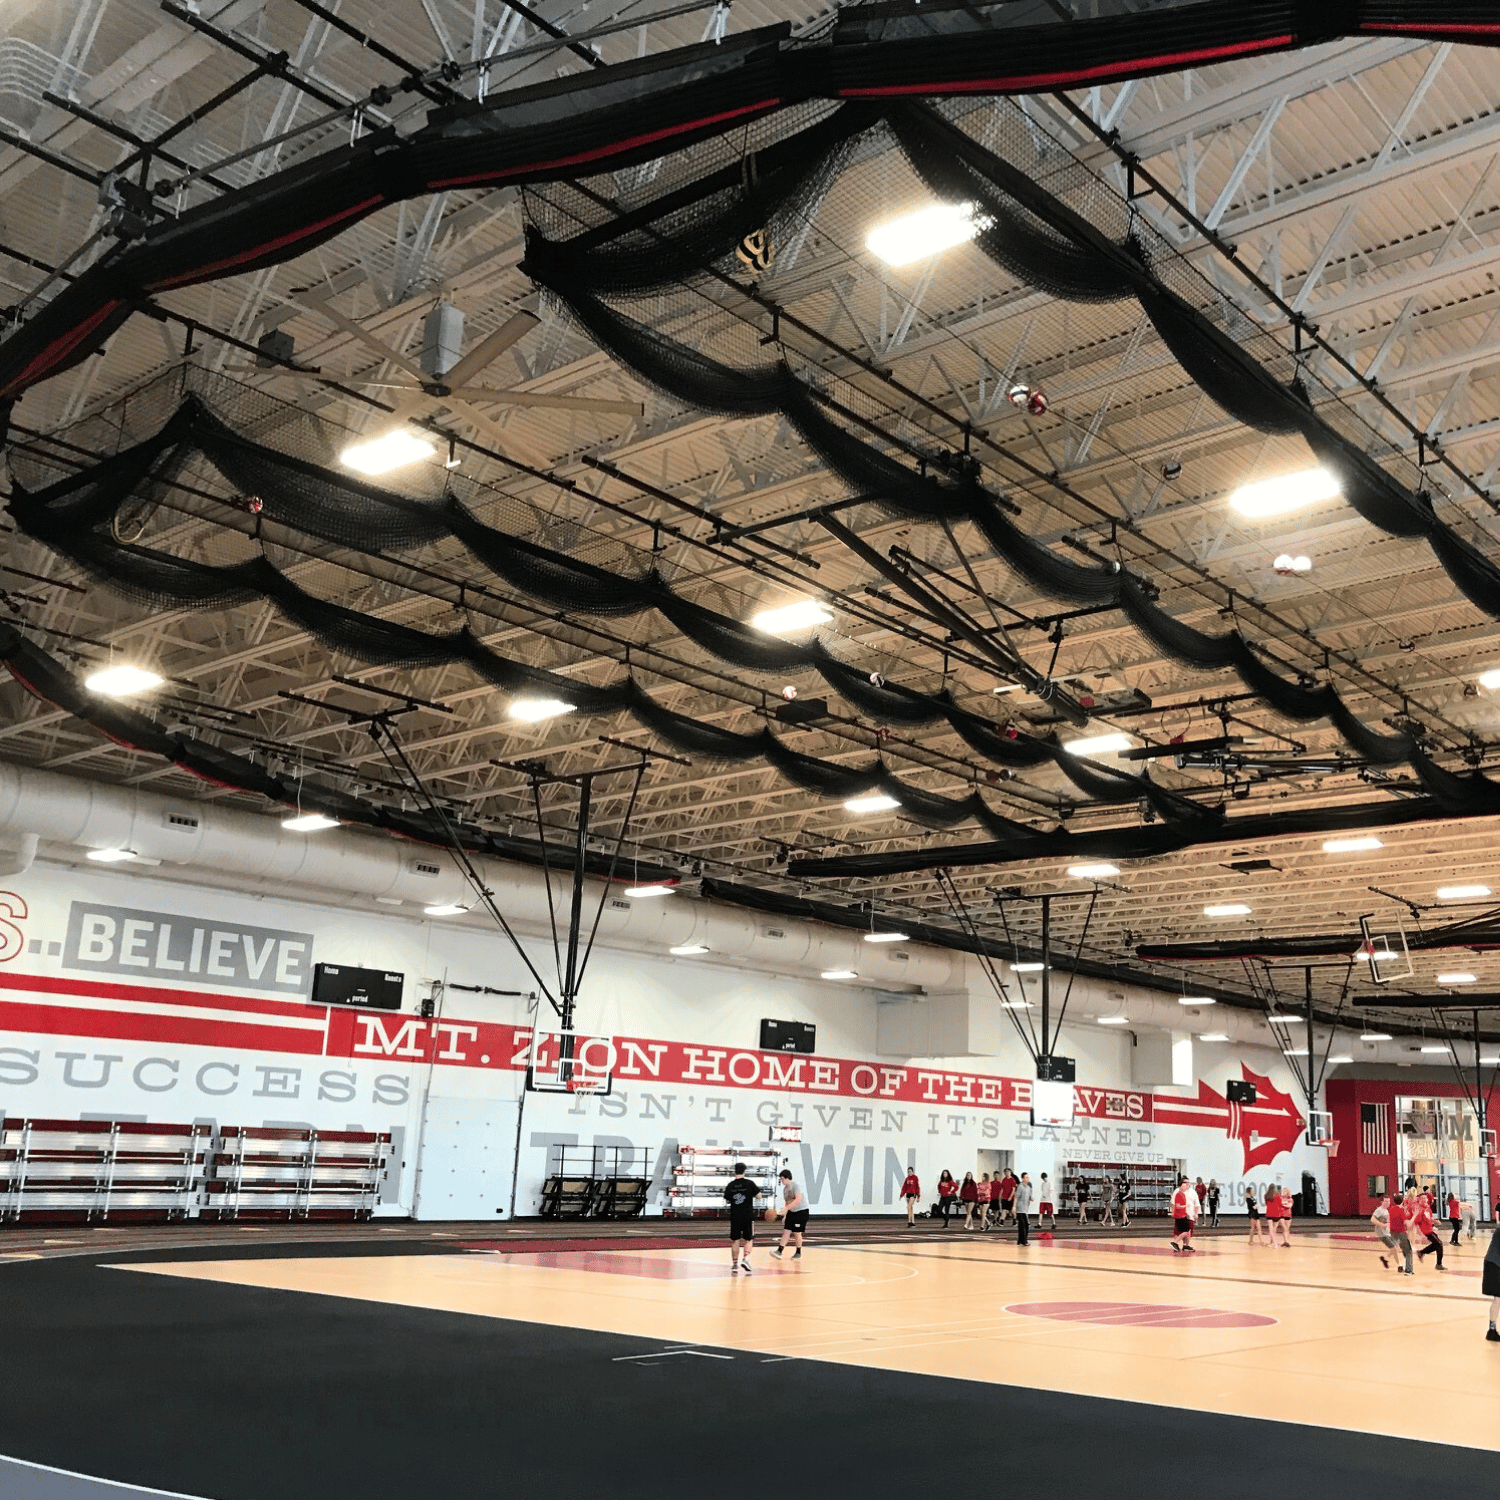 Gymnasium netting suspended from the ceiling in a high school gym.